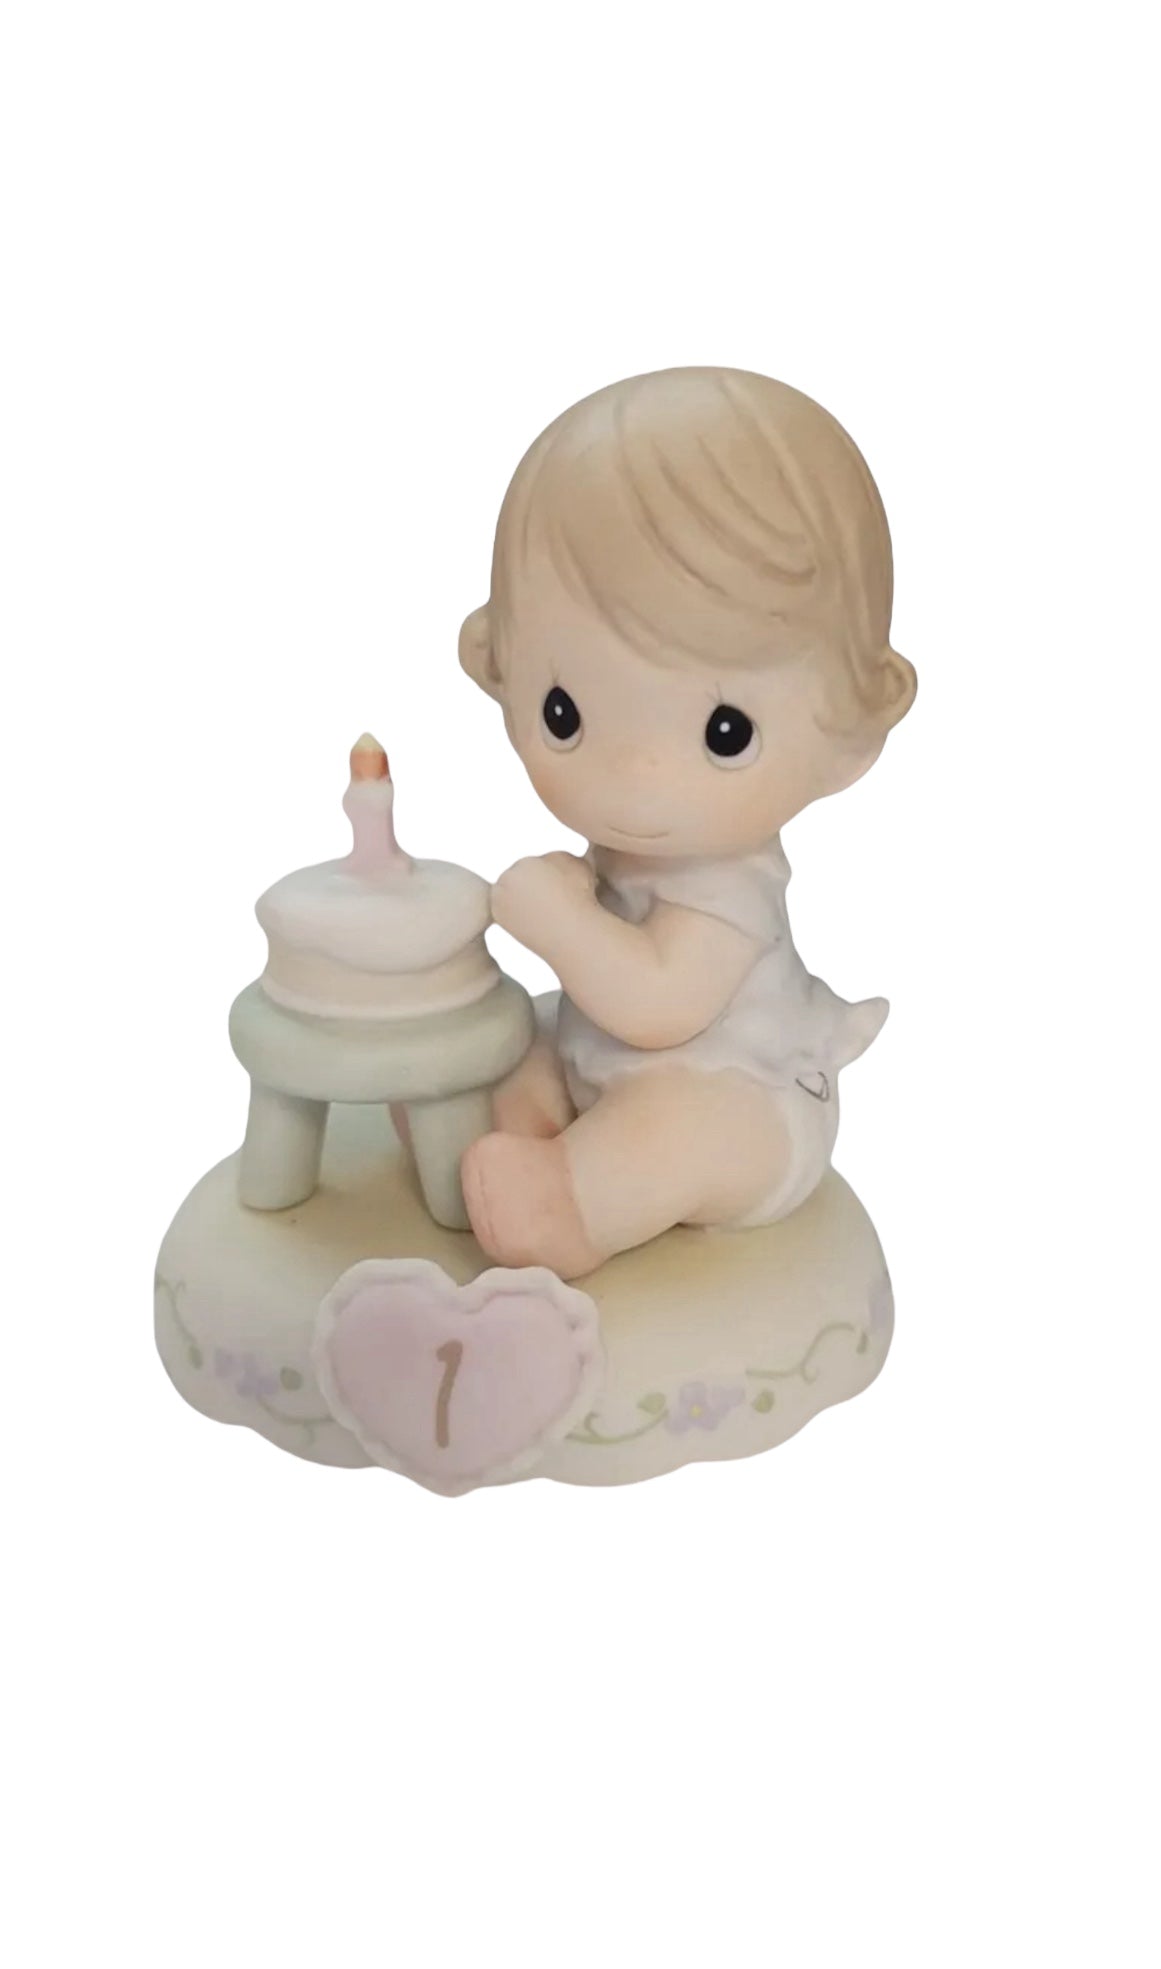 Growing in Grace Age 1 - Precious Moment Figurine 136190